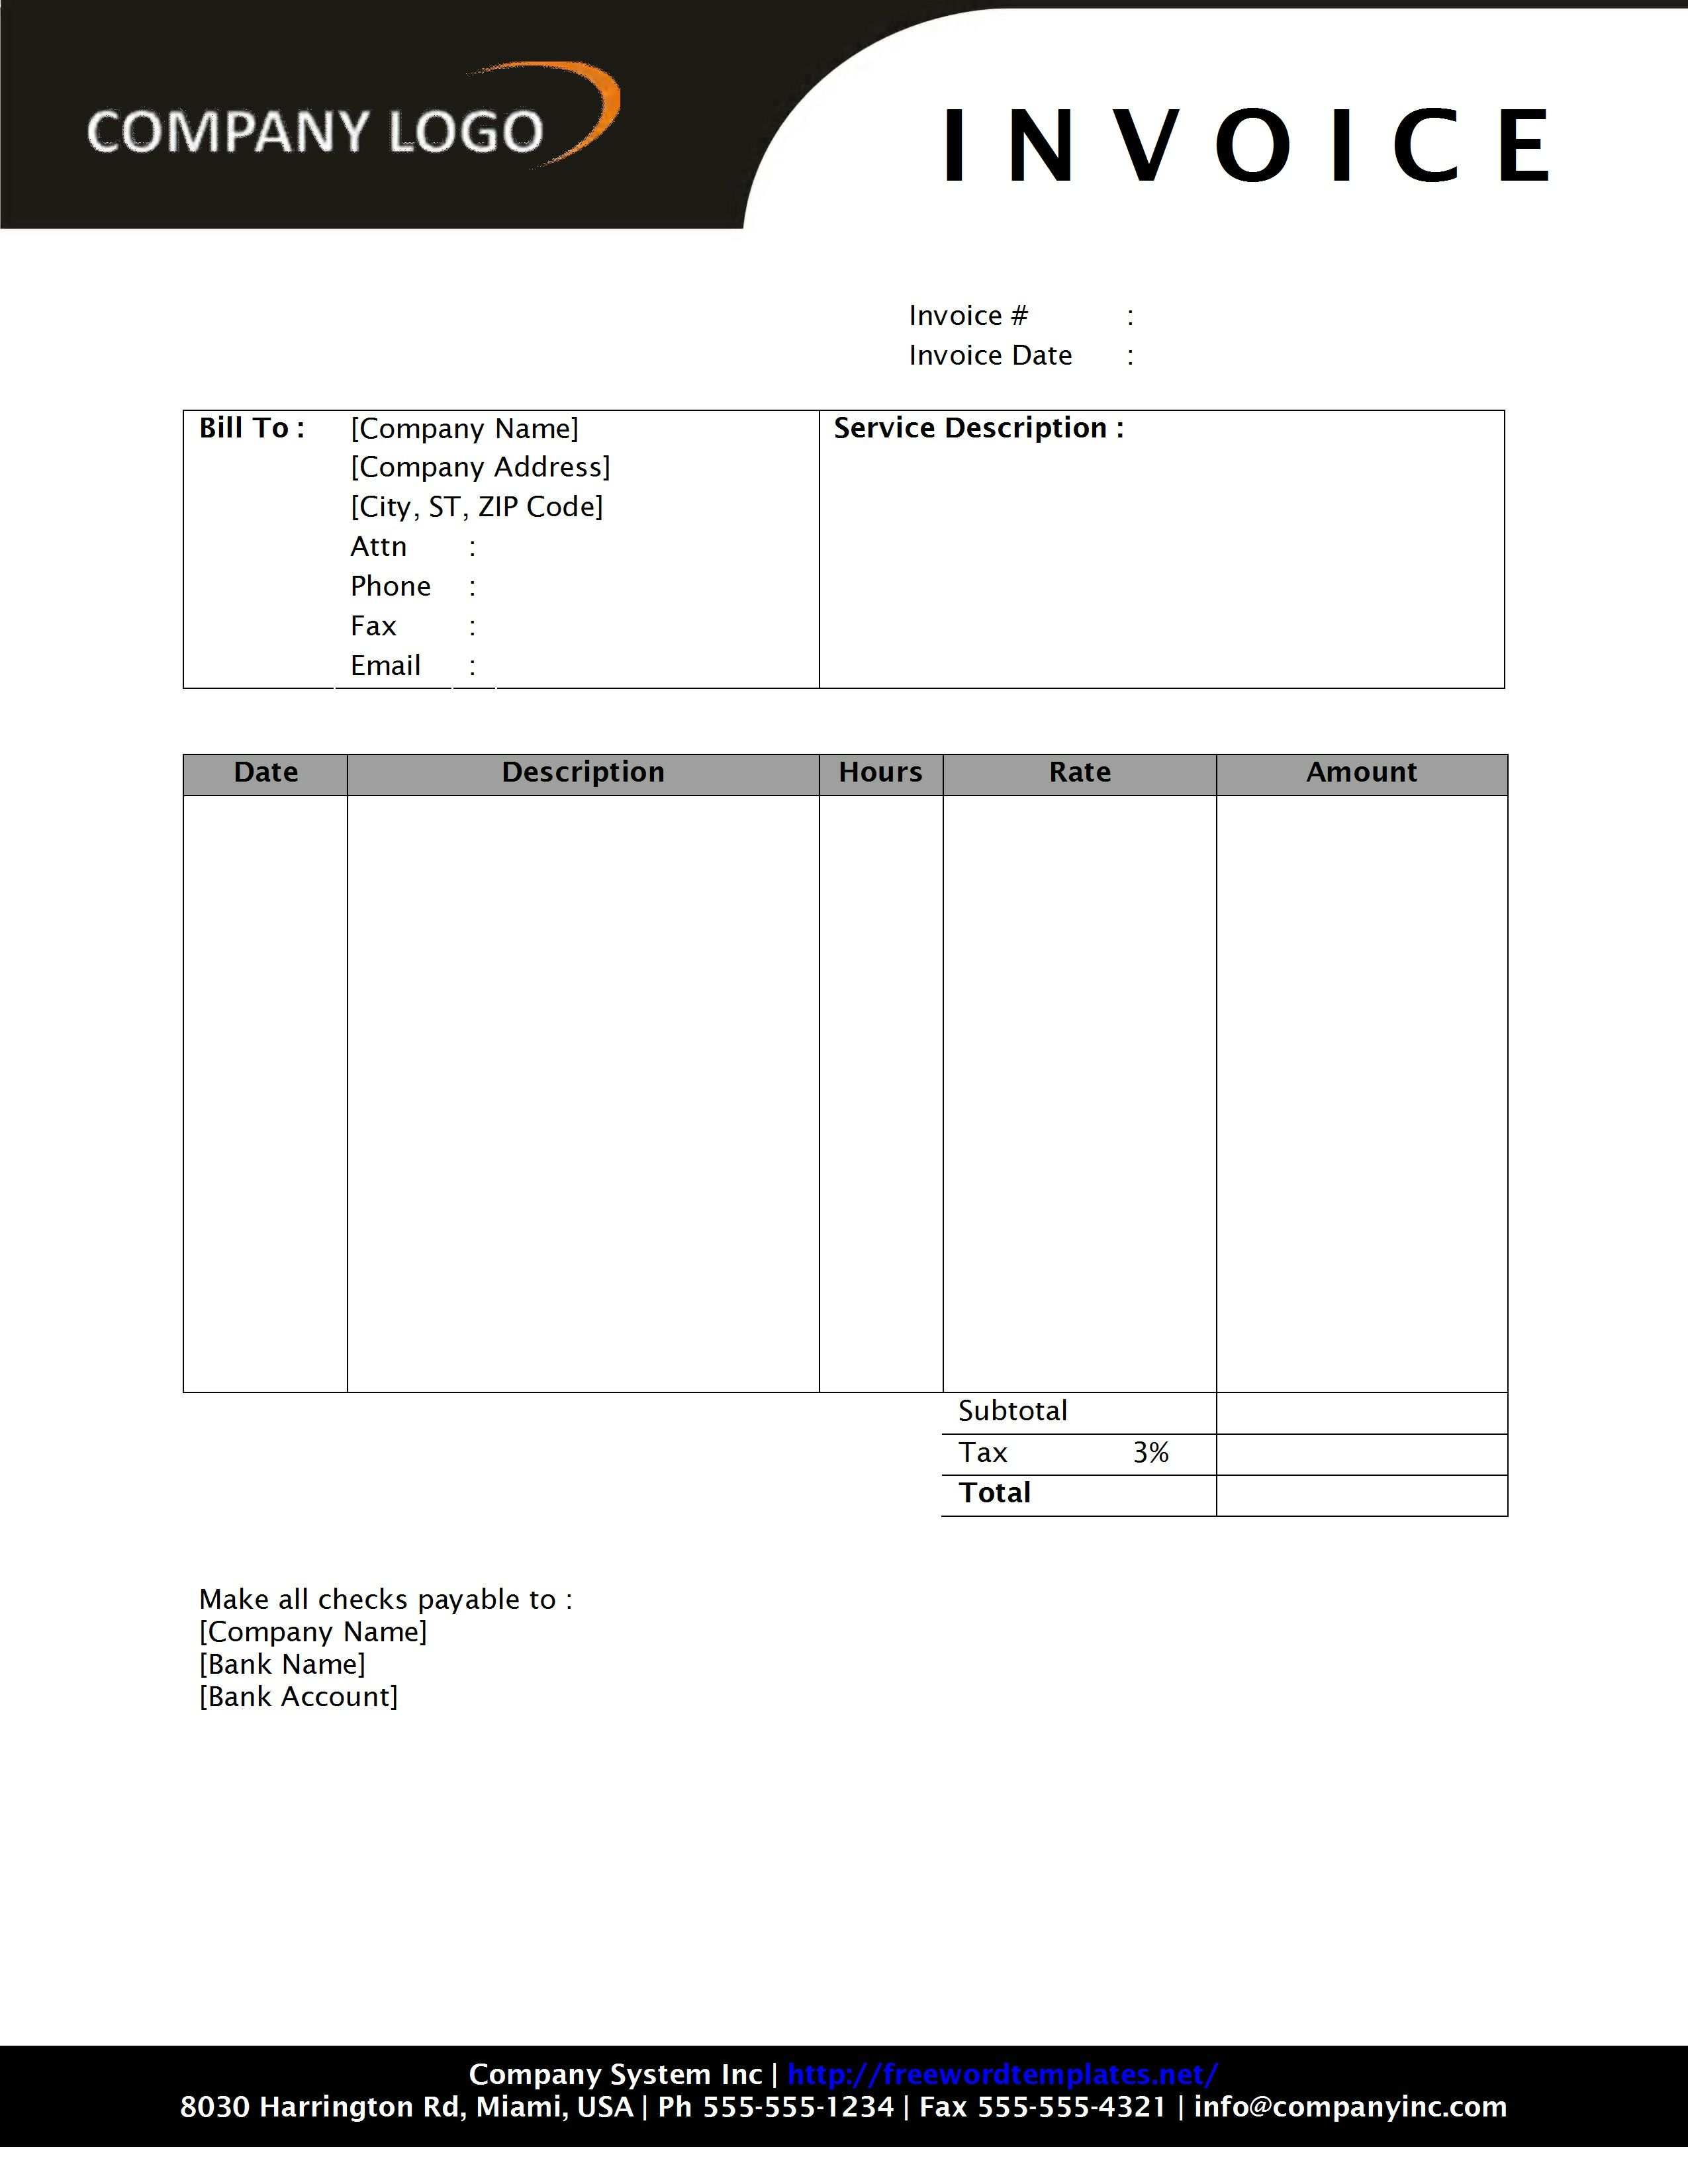 create-and-print-your-own-invoices-using-this-simple-invoice-template